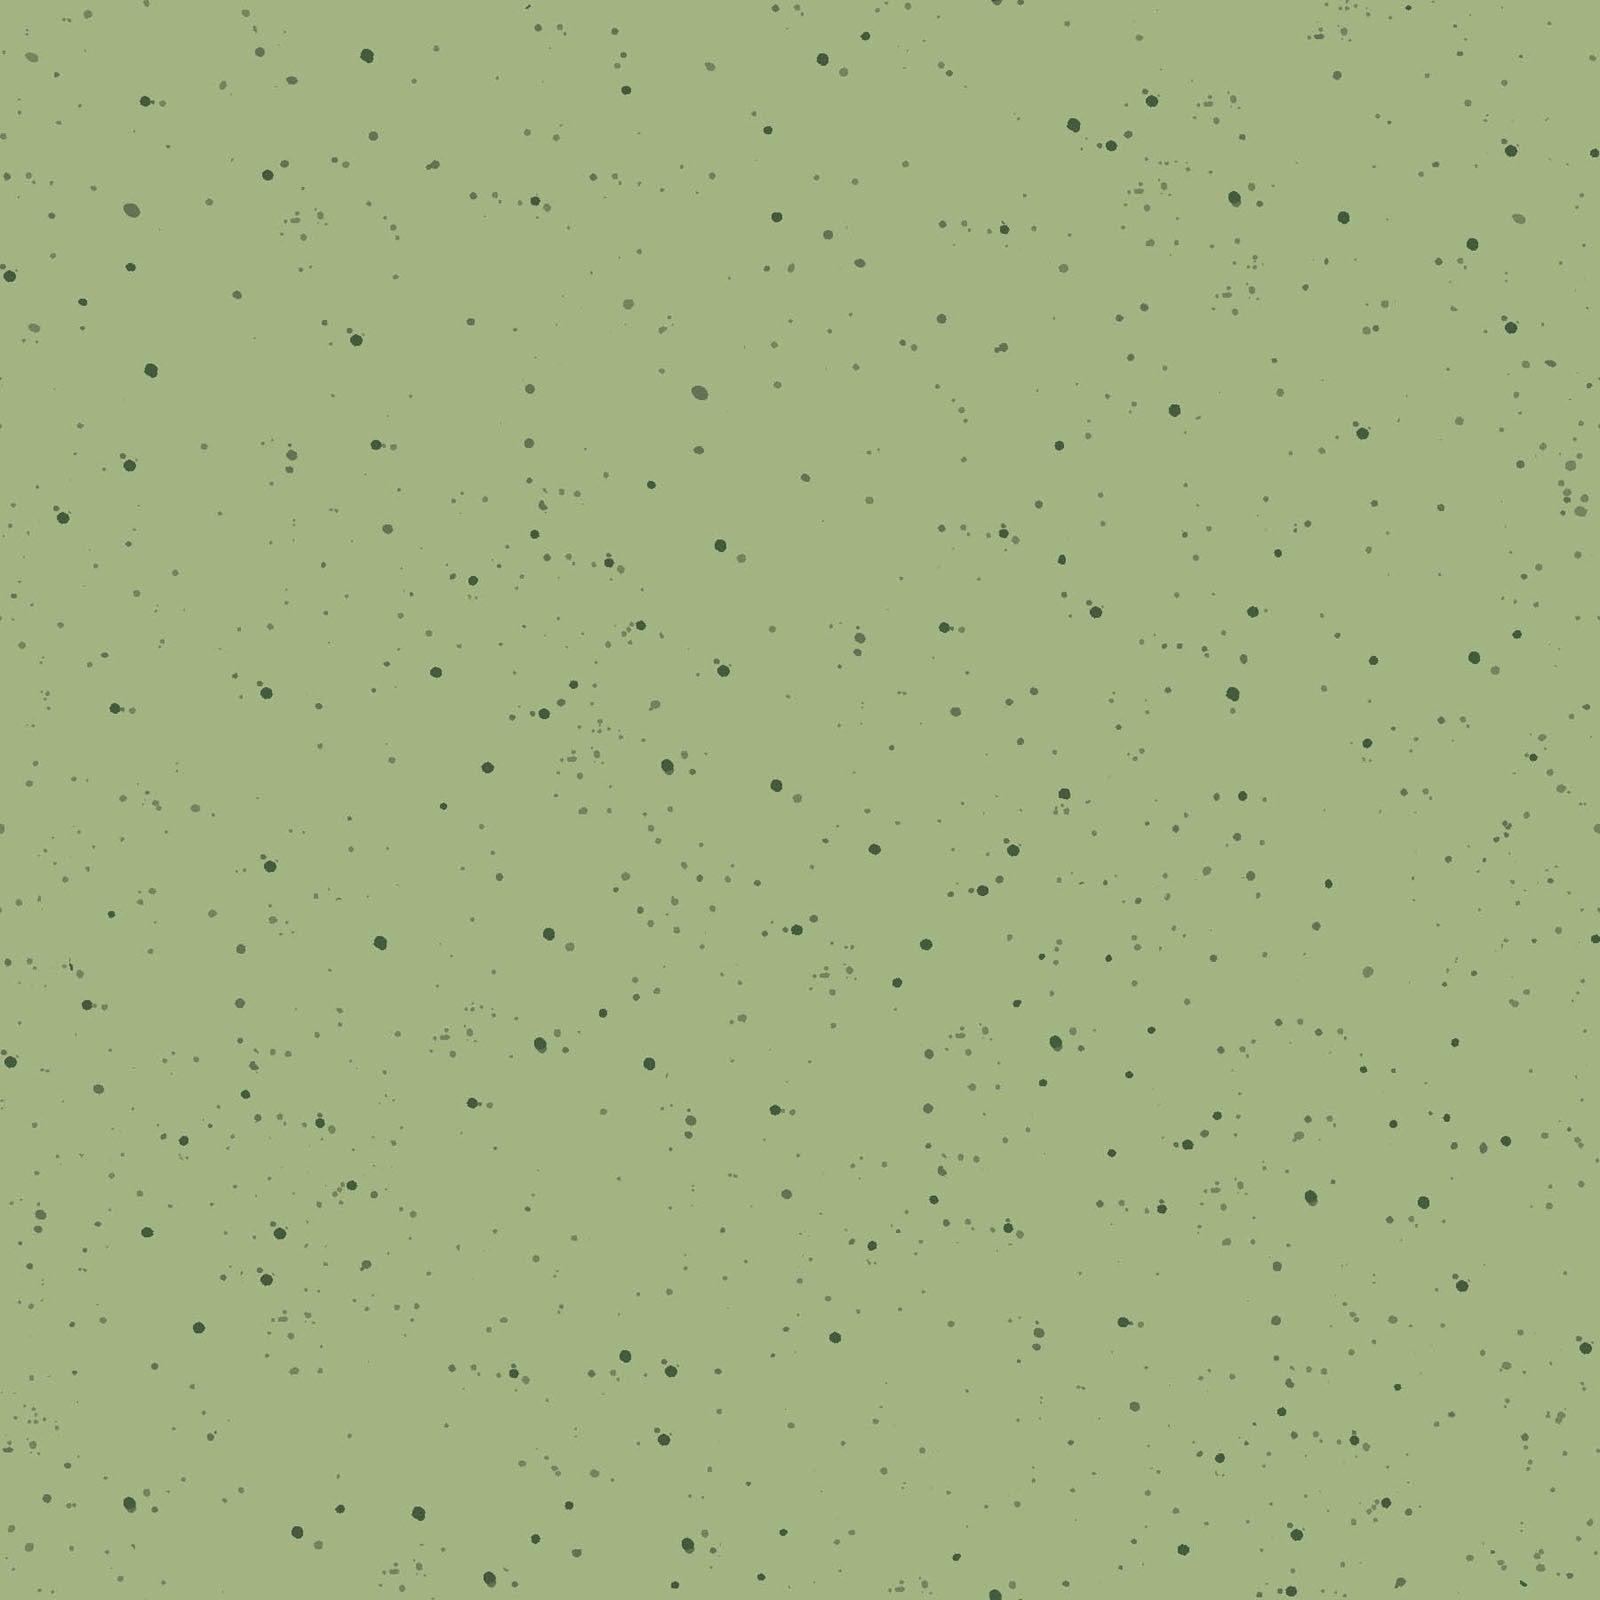 Warm Wishes 6205-G2 by Maywood Studios Cotton Fabric Speckled Solid Green